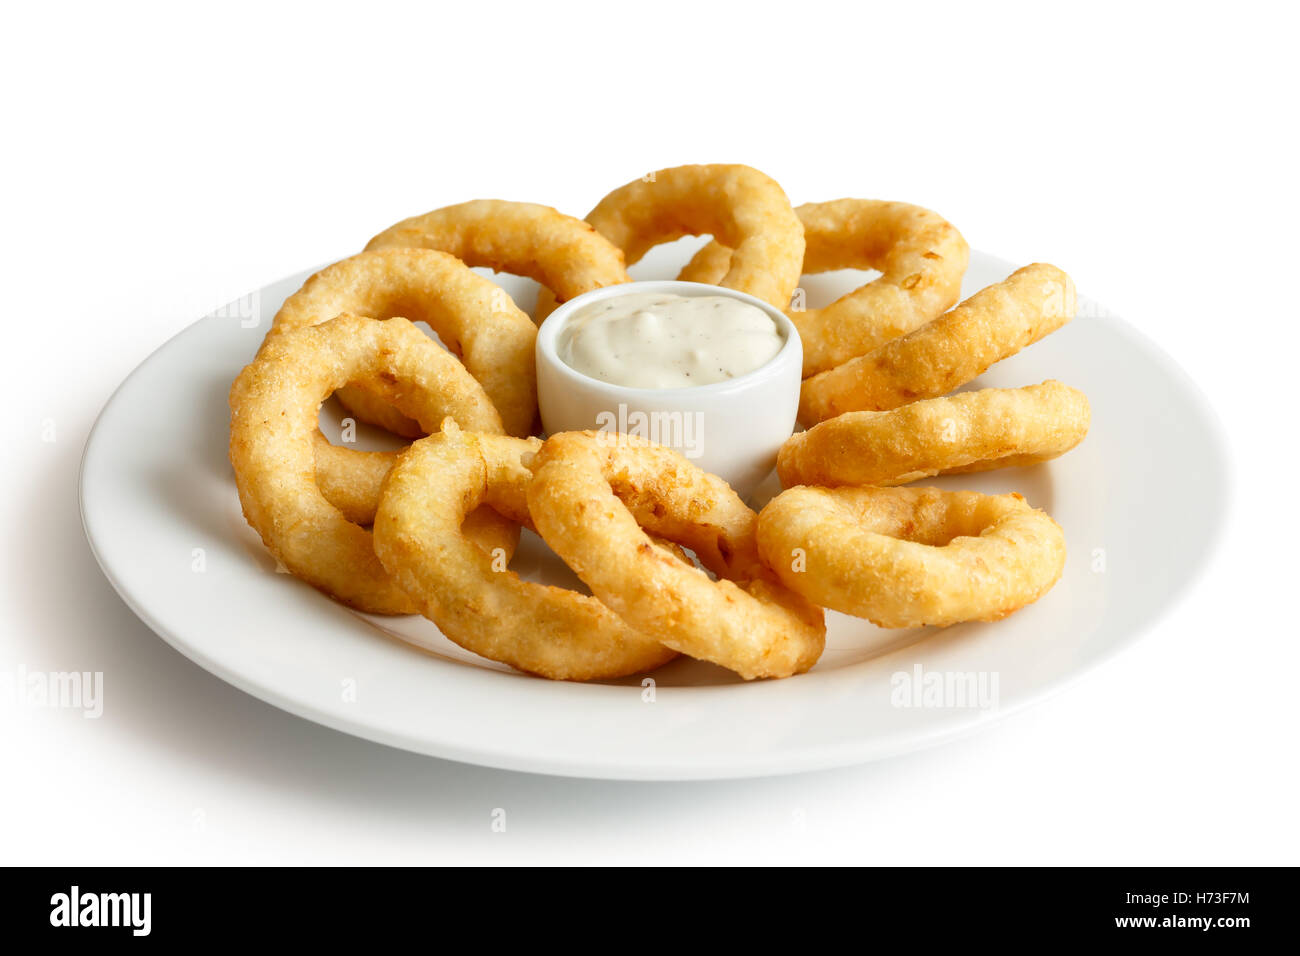 Heap of deep fried onion or calamari rings with garlic mayonnaise dip on white plate. Stock Photo